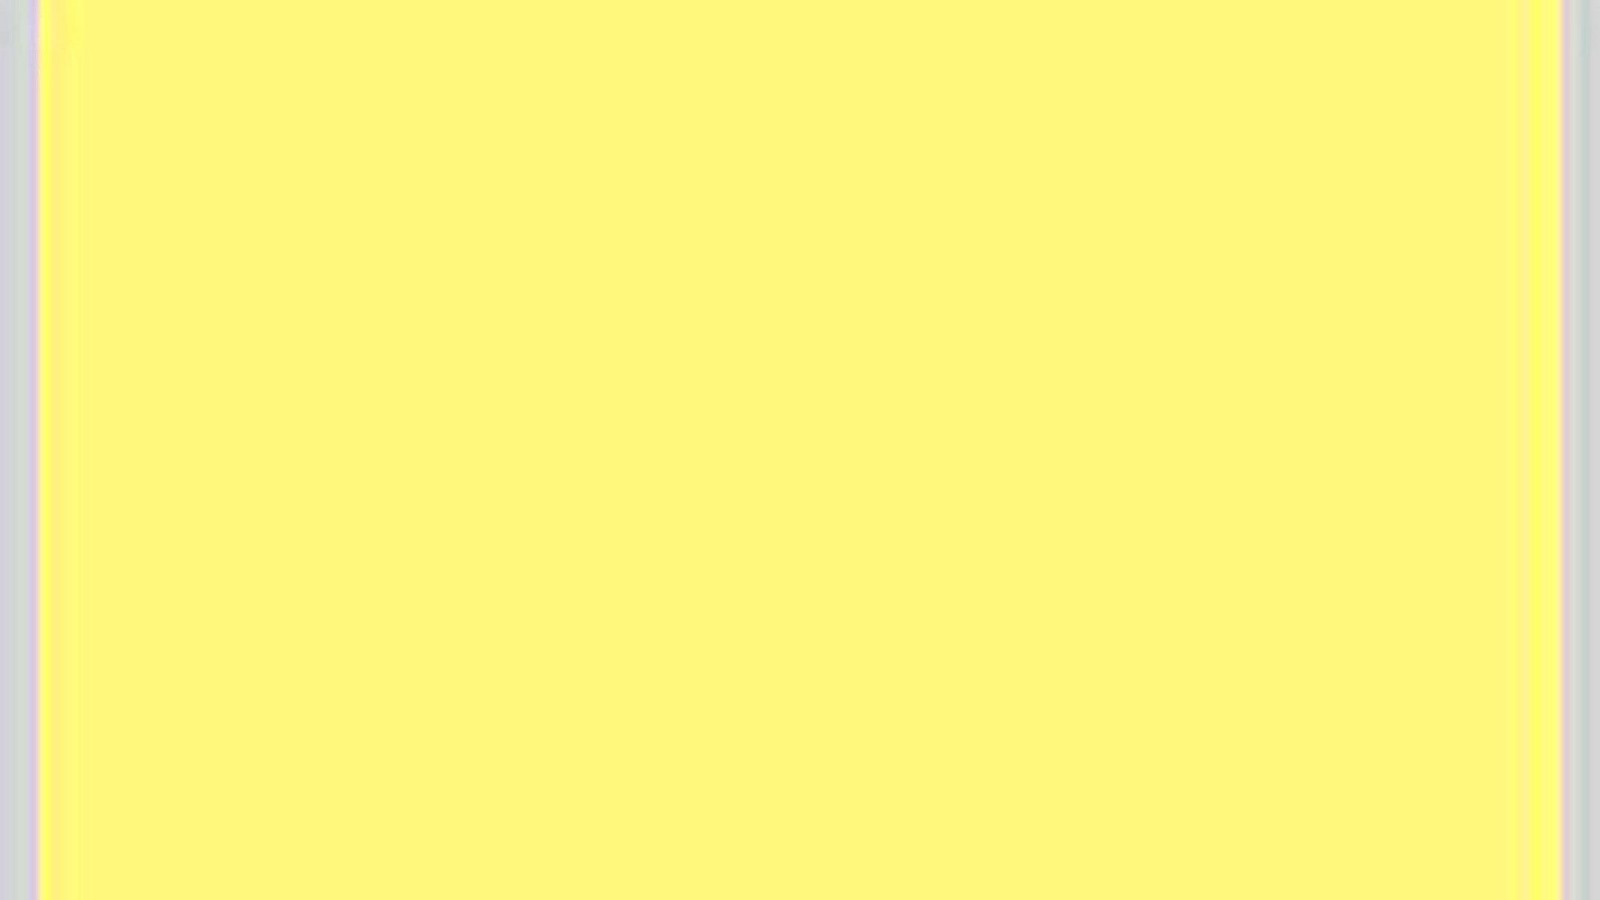 10. "Buttercup Yellow" - A buttery, pale yellow shade that will make your nails look like sunshine - wide 6